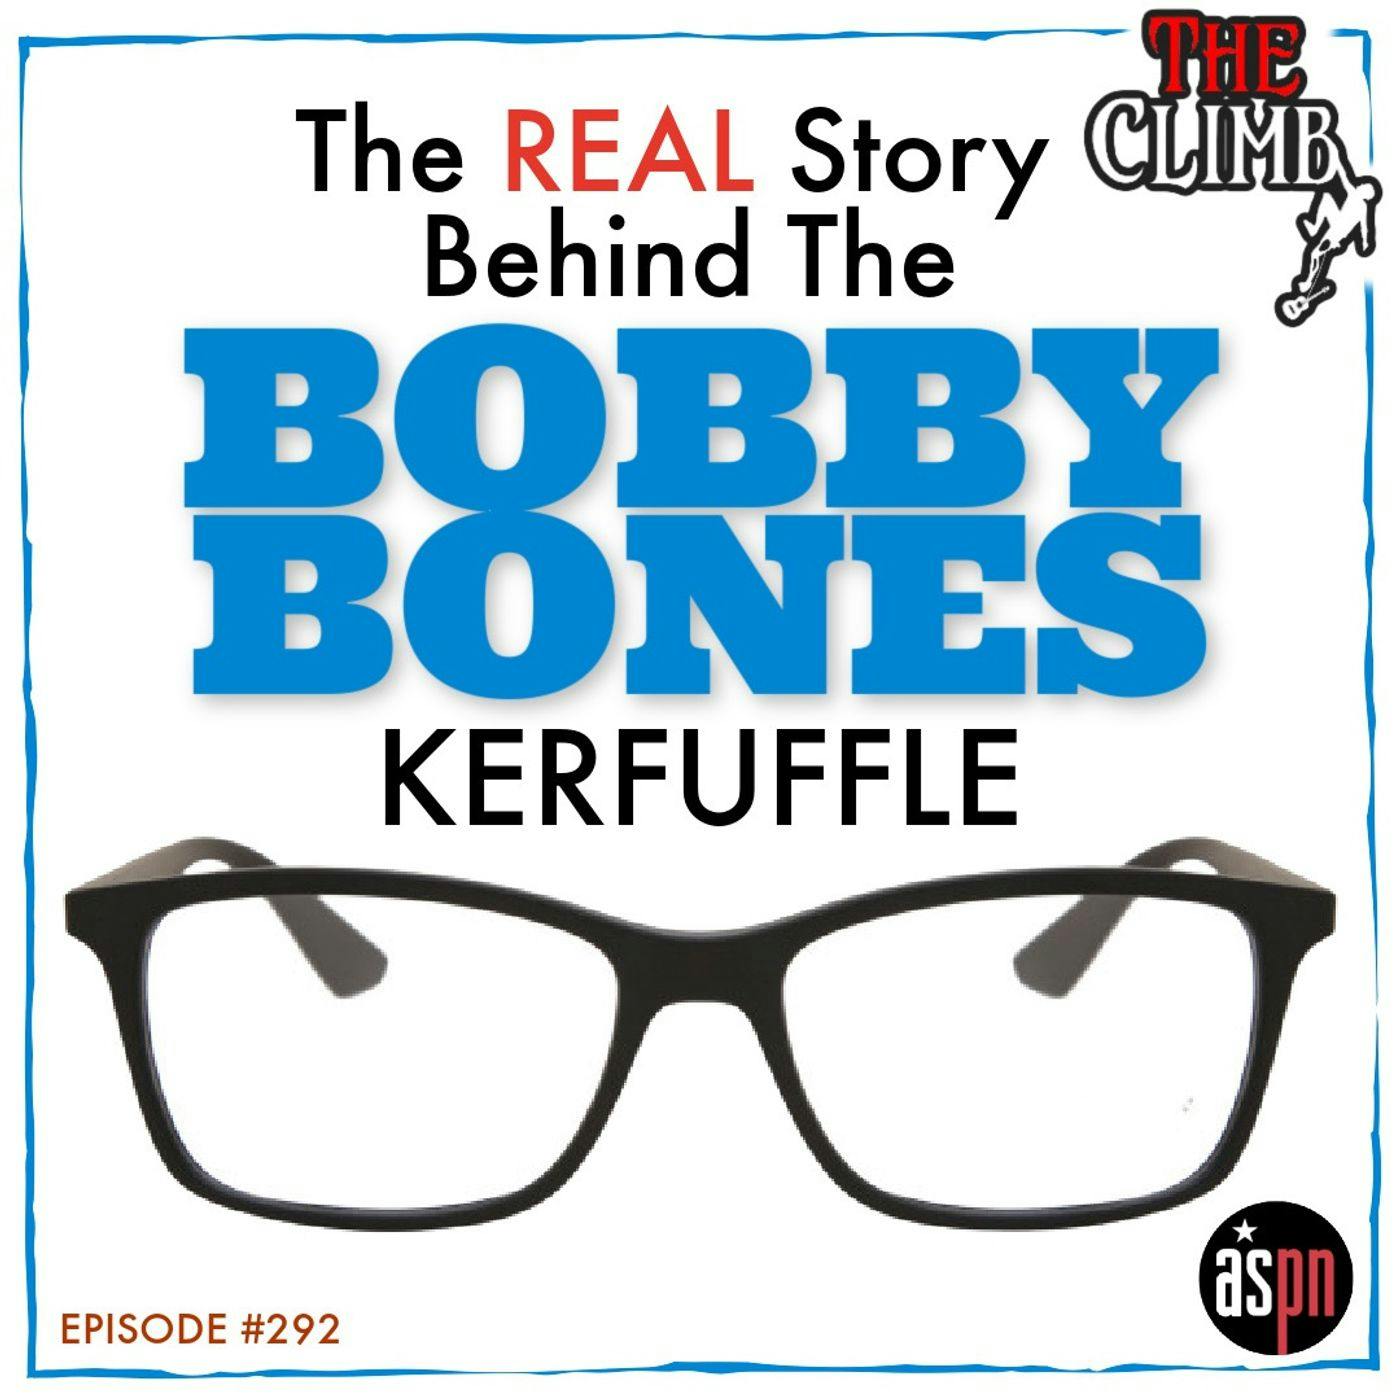 Episode #292: The REAL Story Behind The Bobby Bones Kerfuffle